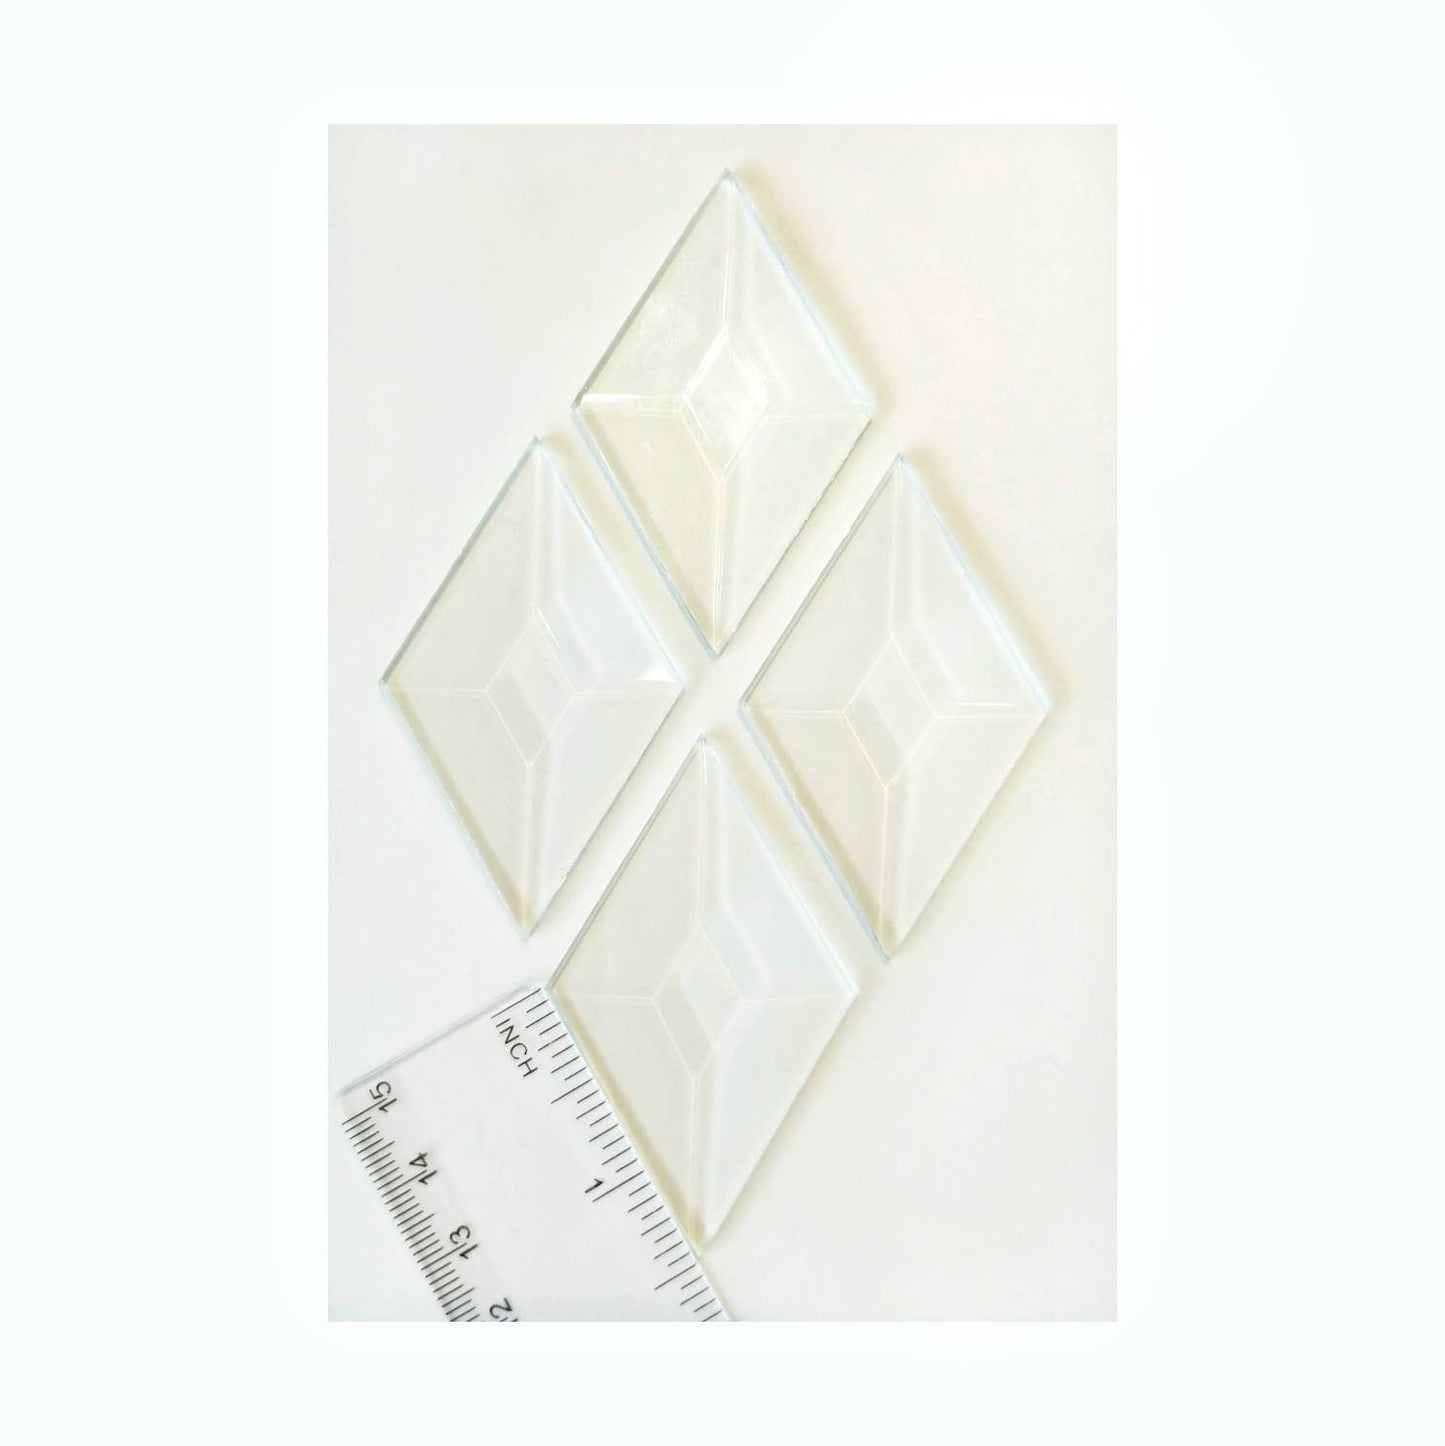 Stained Glass Bevels, Diamond Shaped. 1.5"× 2.5". Clear Prism Polished, Angled Edges. Sets of 4 or 8, listed in variations.